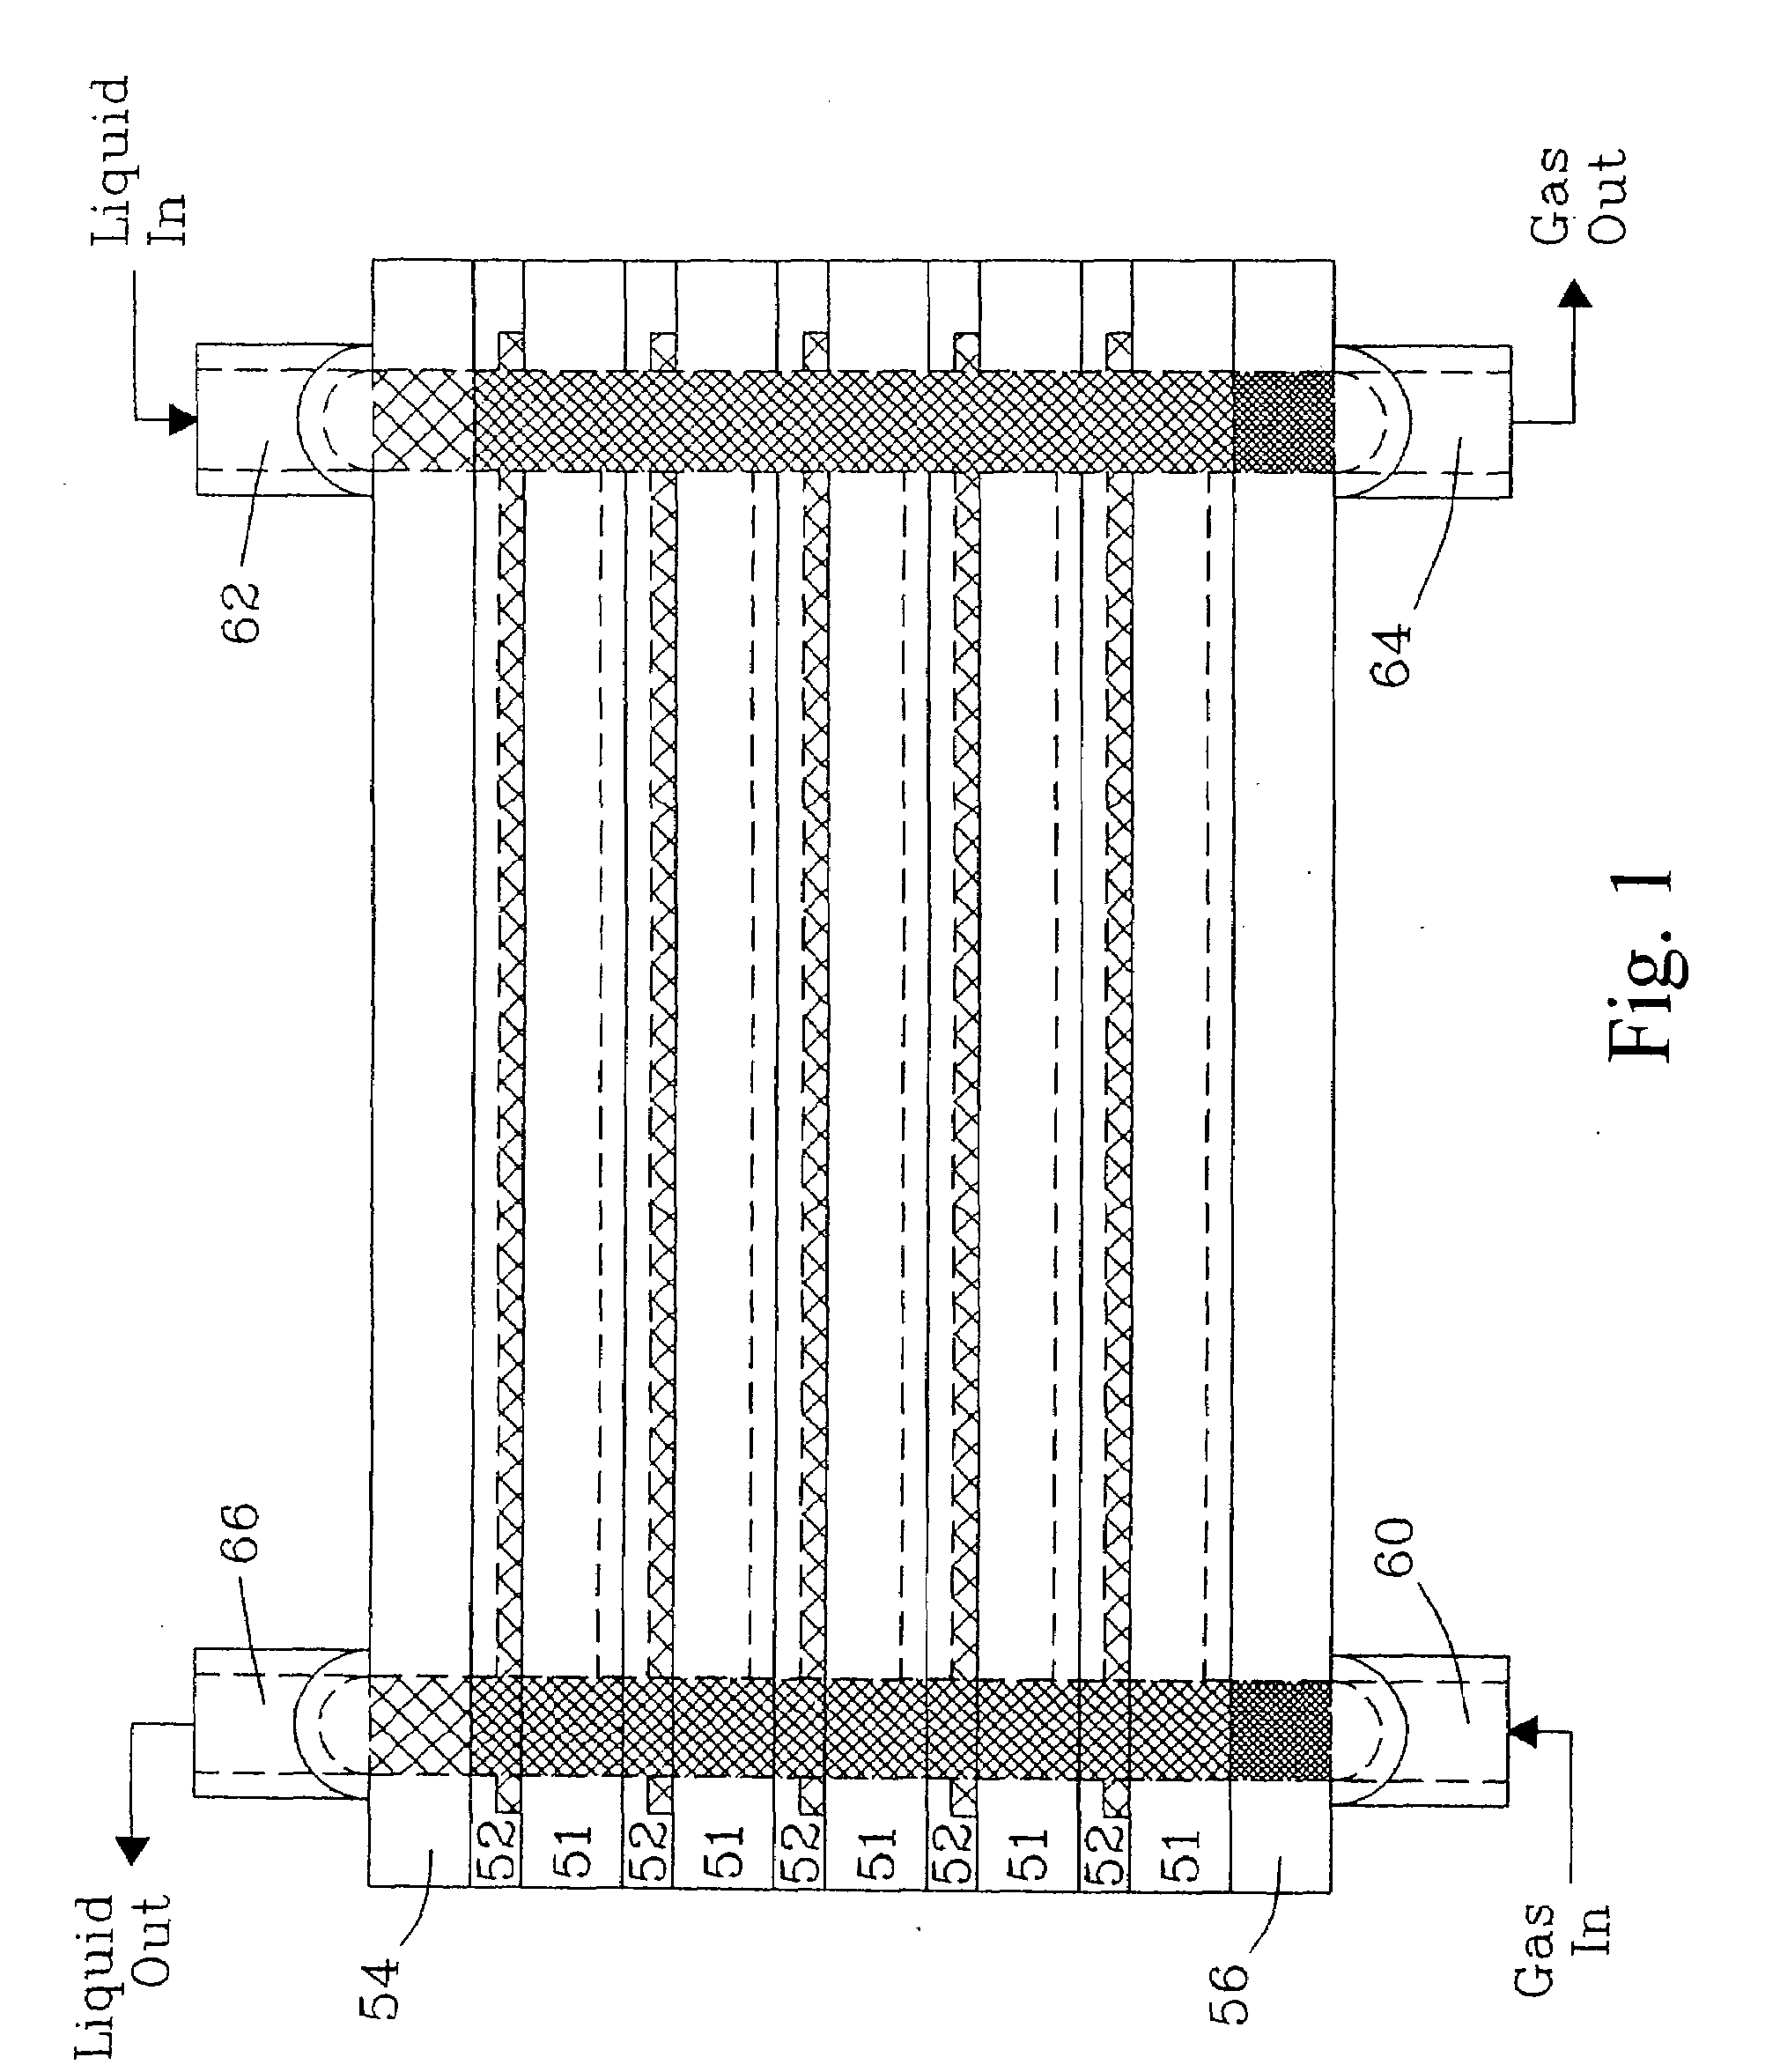 Mixing in Wicking Structures and the Use of Enhanced Mixing Within Wicks in Microchannel Devices